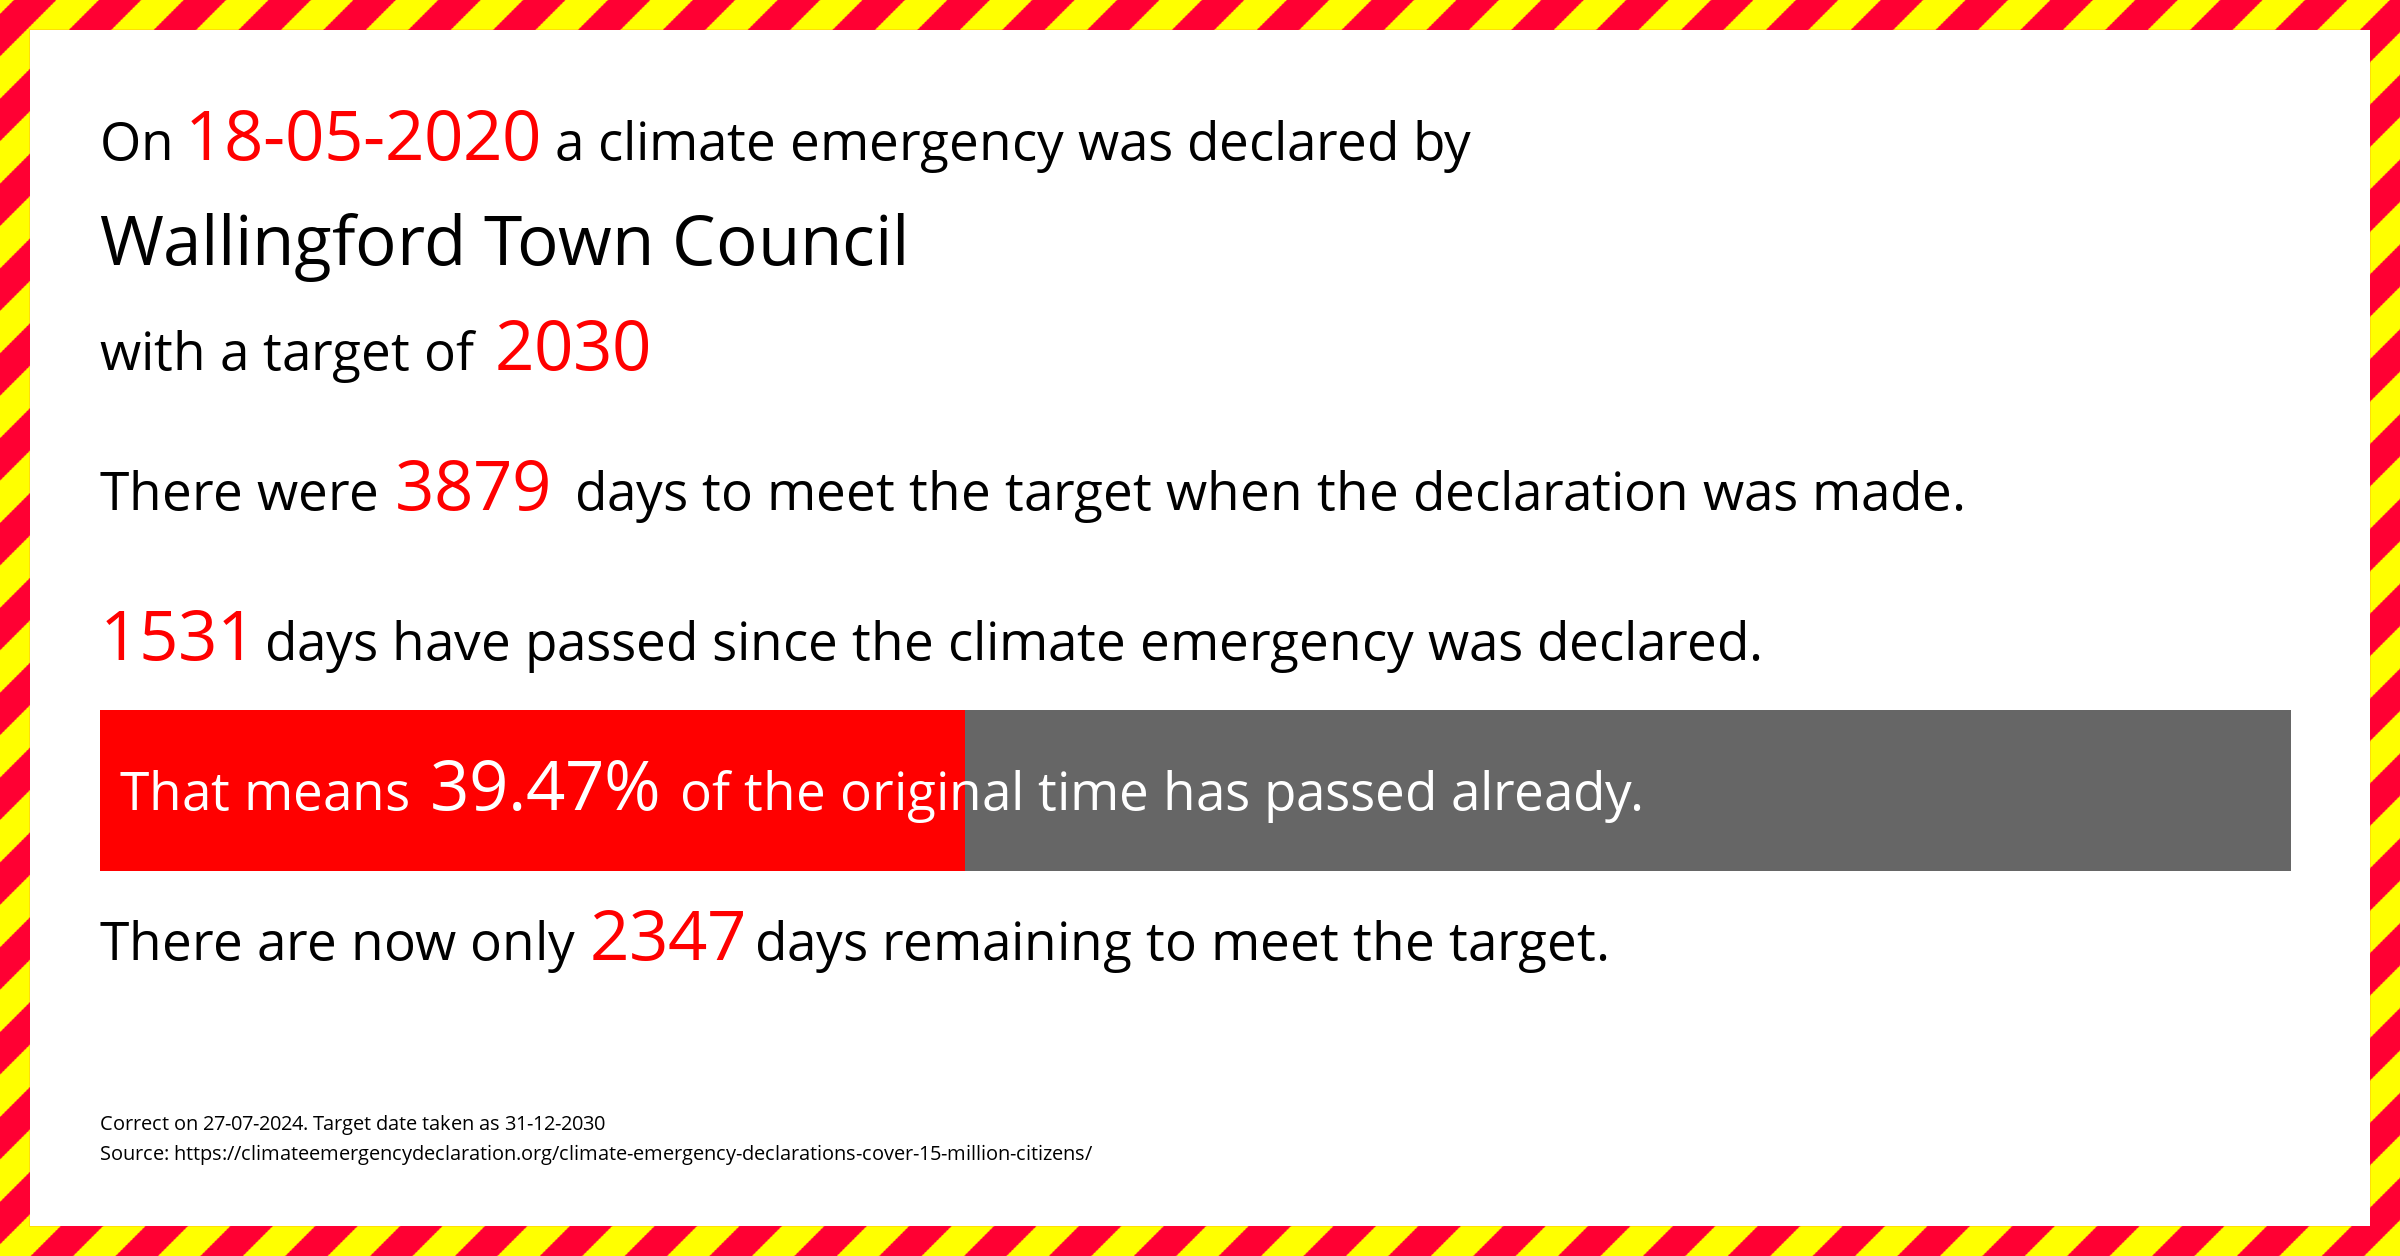 Wallingford Town Council  declared a Climate emergency on Monday 18th May 2020, with a target of 2030.